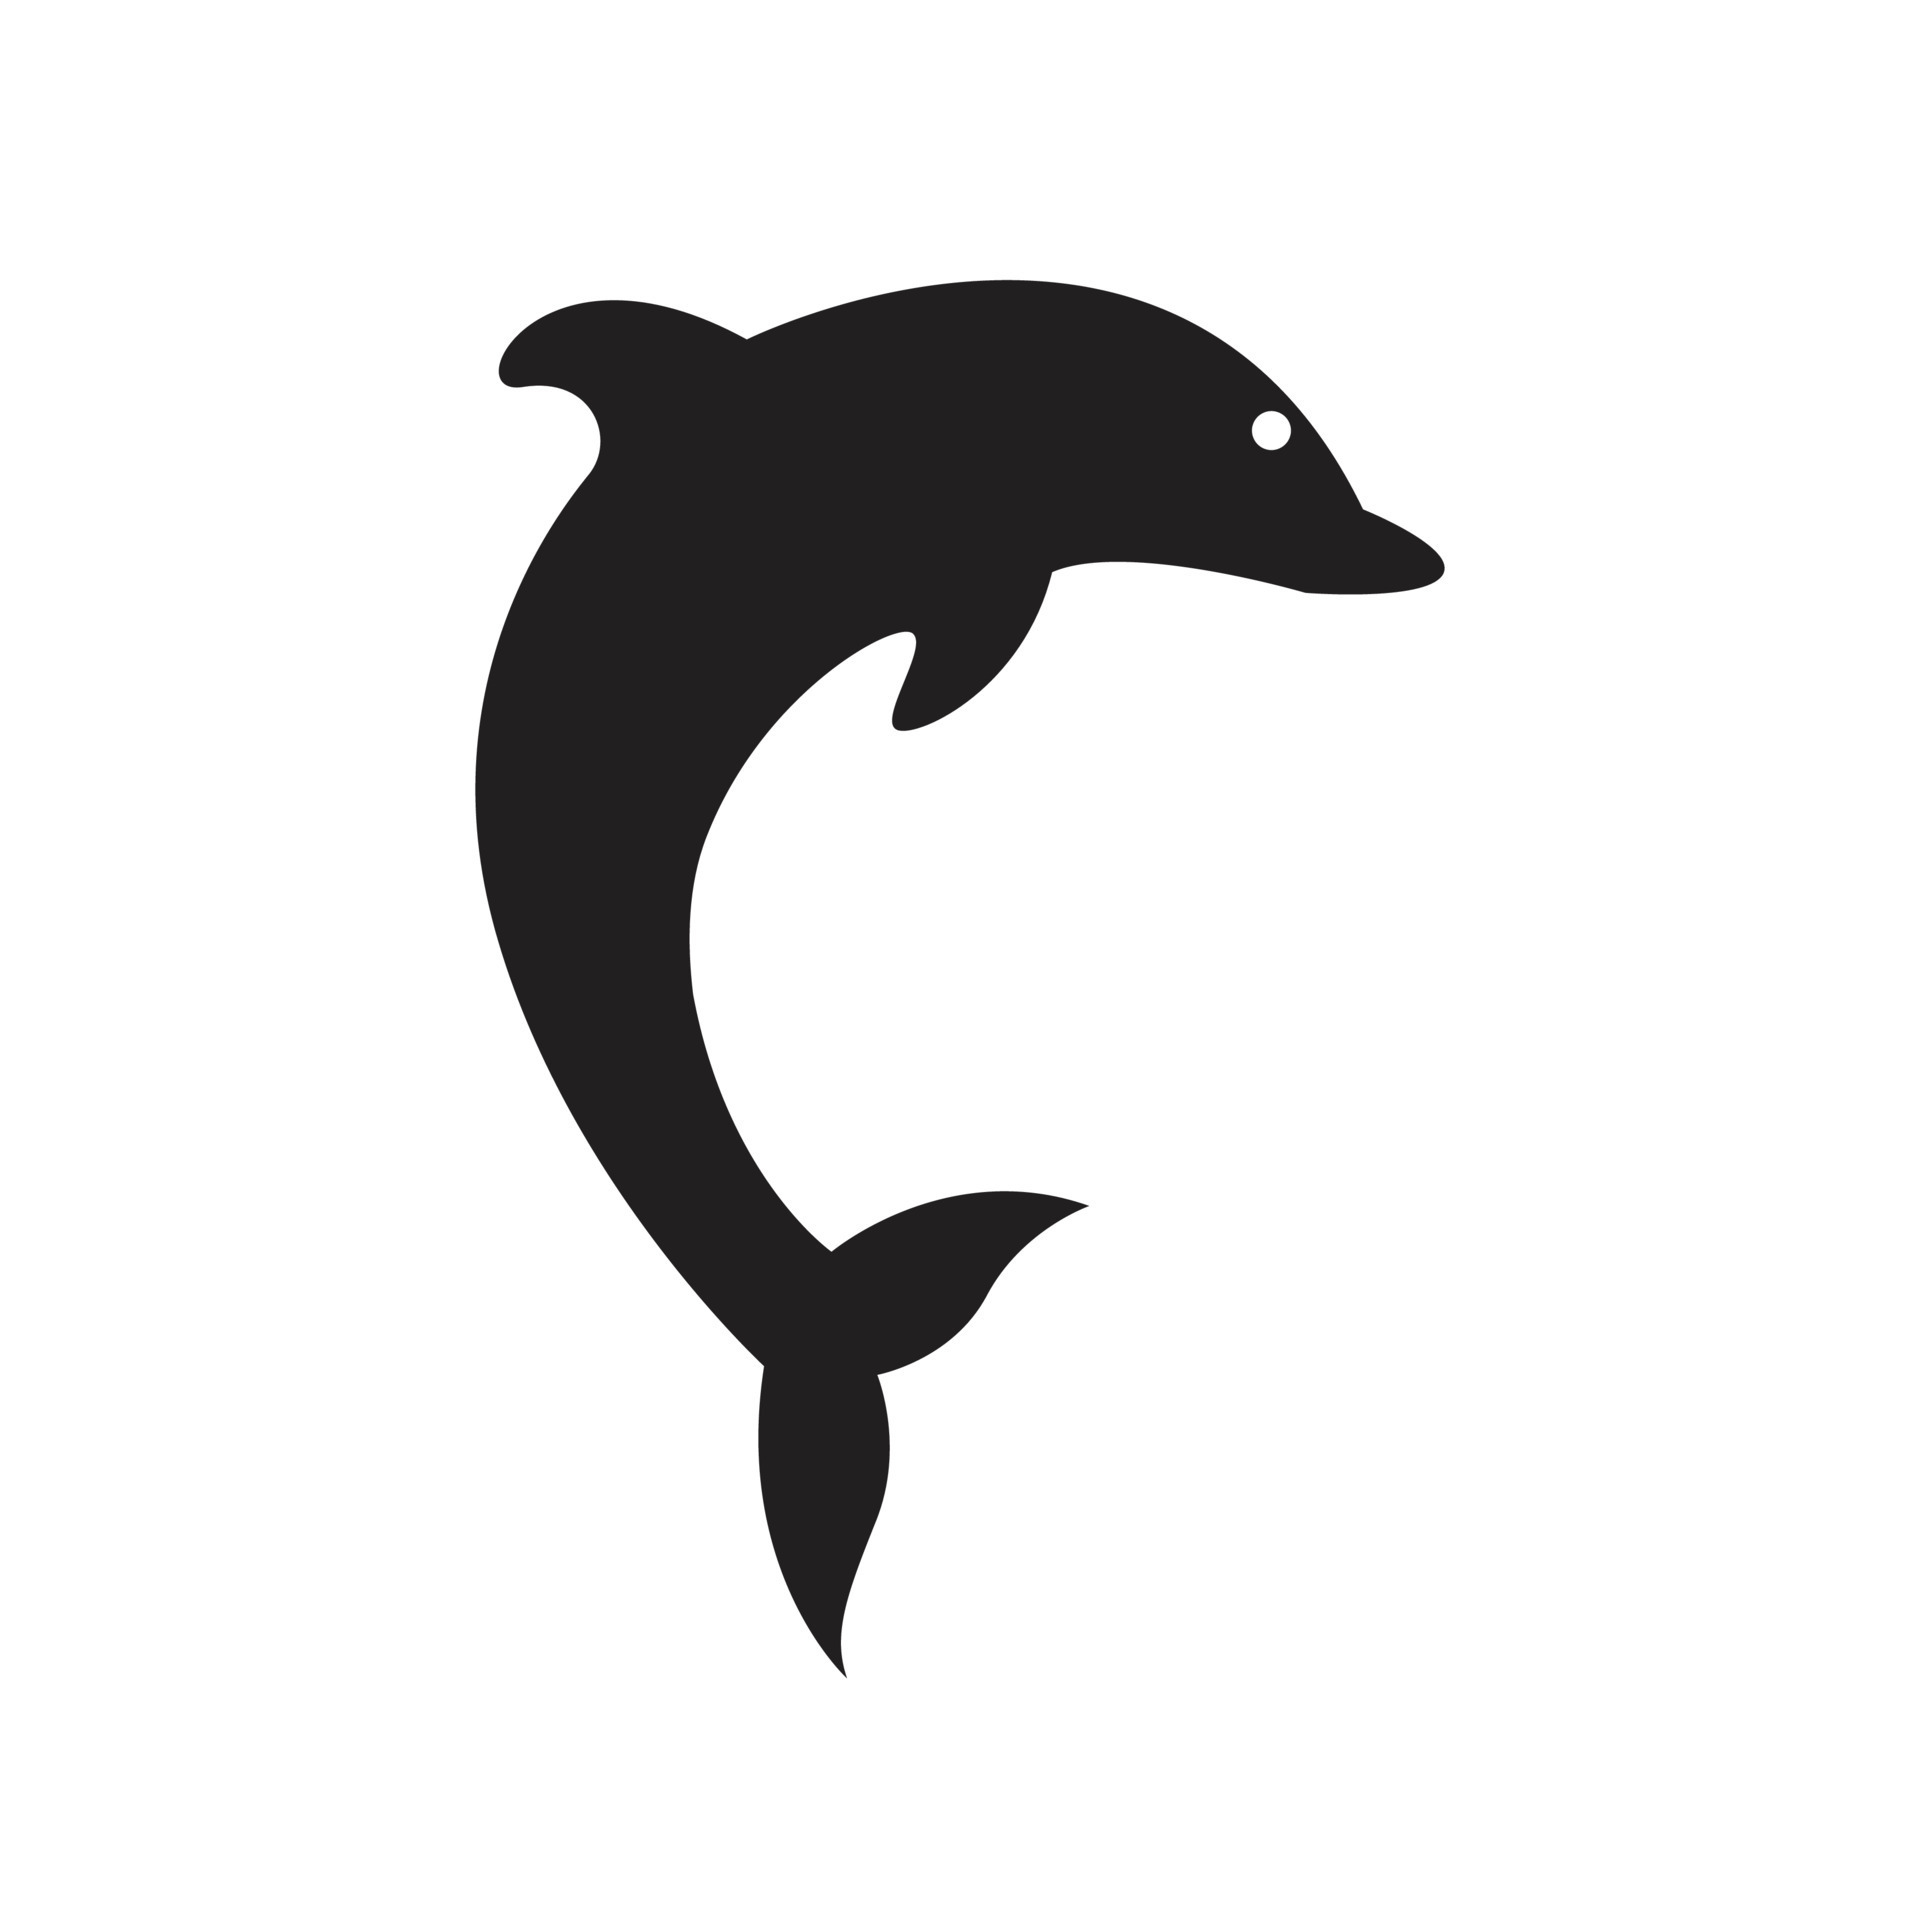 dolphin black silhouette design vector. jumping dolphin icon 15634972 ...